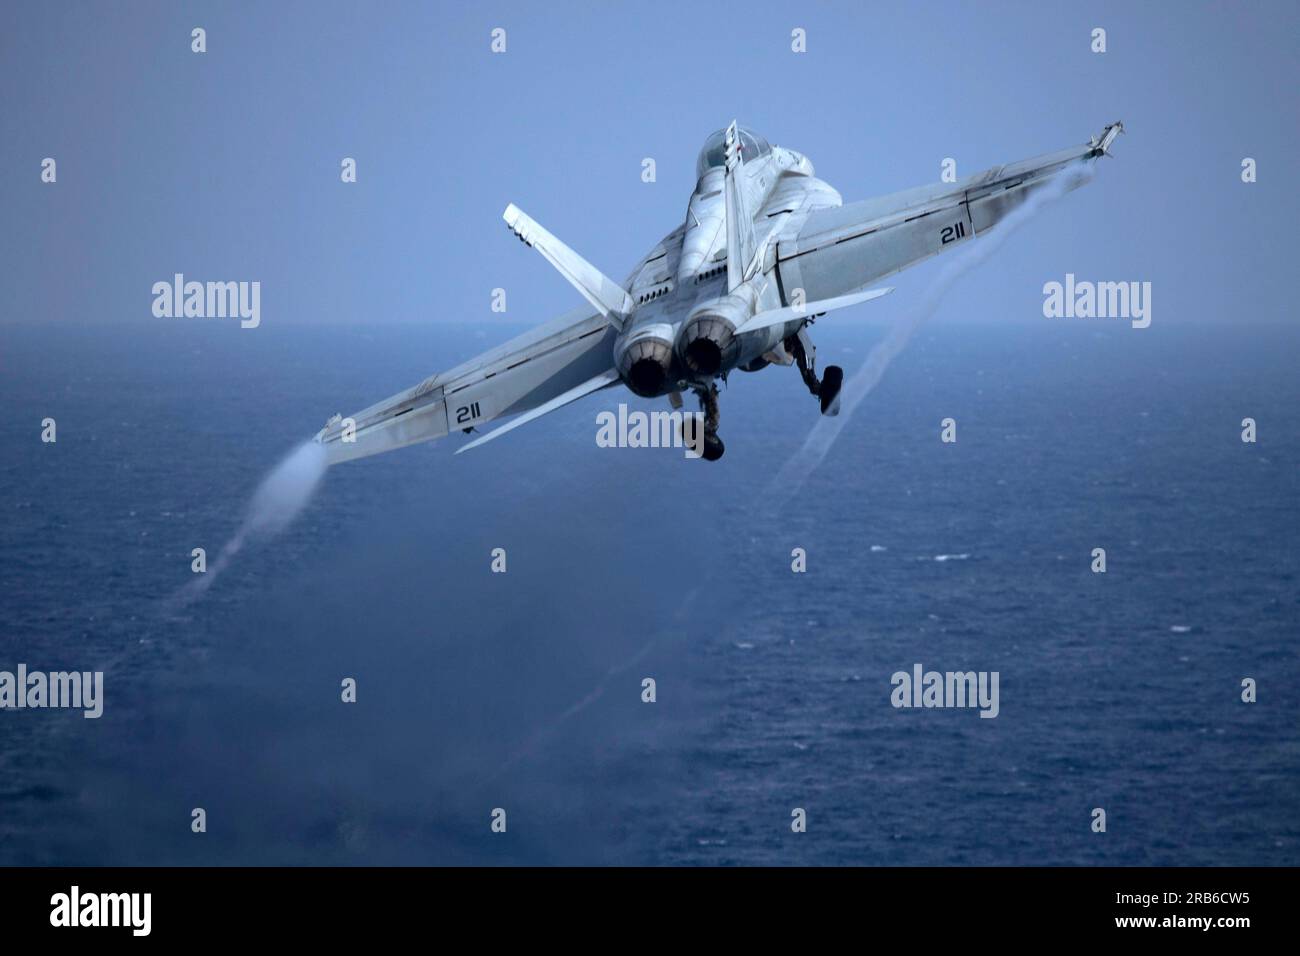 Mediterranean Sea, International Waters. 01 July, 2023. A U.S. Navy F/A-18F Super Hornet fighter jet, attached to the Blacklions of Strike Fighter Squadron 213, launches from the flight deck aboard the Nimitz-class aircraft carrier USS Gerald R. Ford operating on the Mediterranean Sea, July 1, 2023 off the coast of Italy.  Credit: MC2 Nolan Pennington/U.S. Navy Photo/Alamy Live News Stock Photo